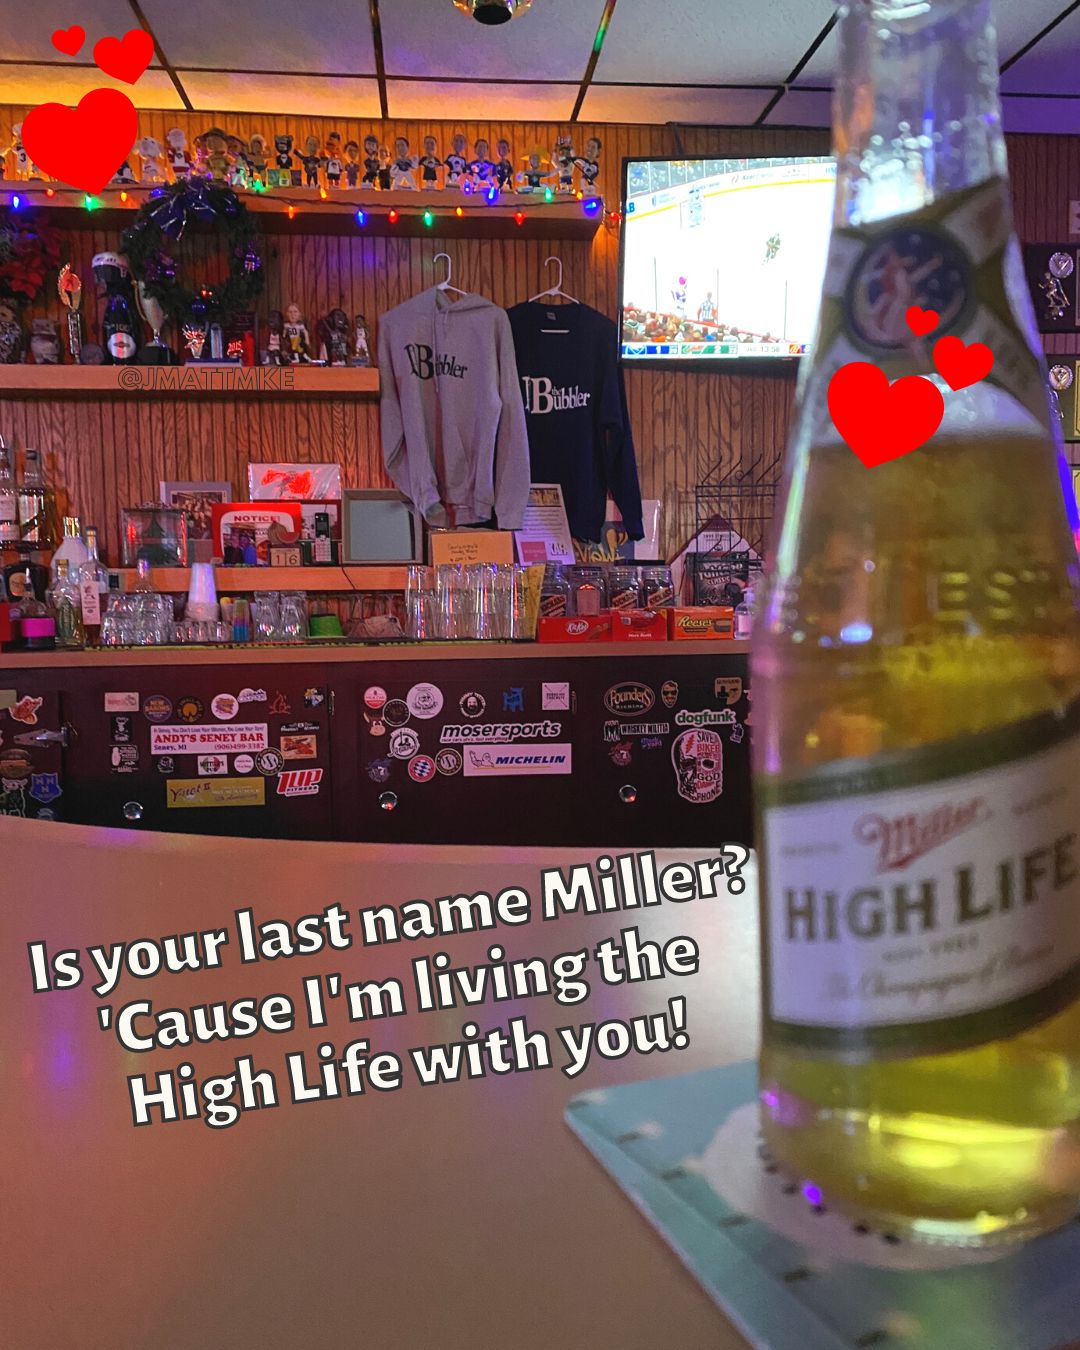 “Is your last name Miller? ‘Cause I’m living the High Life with you!”